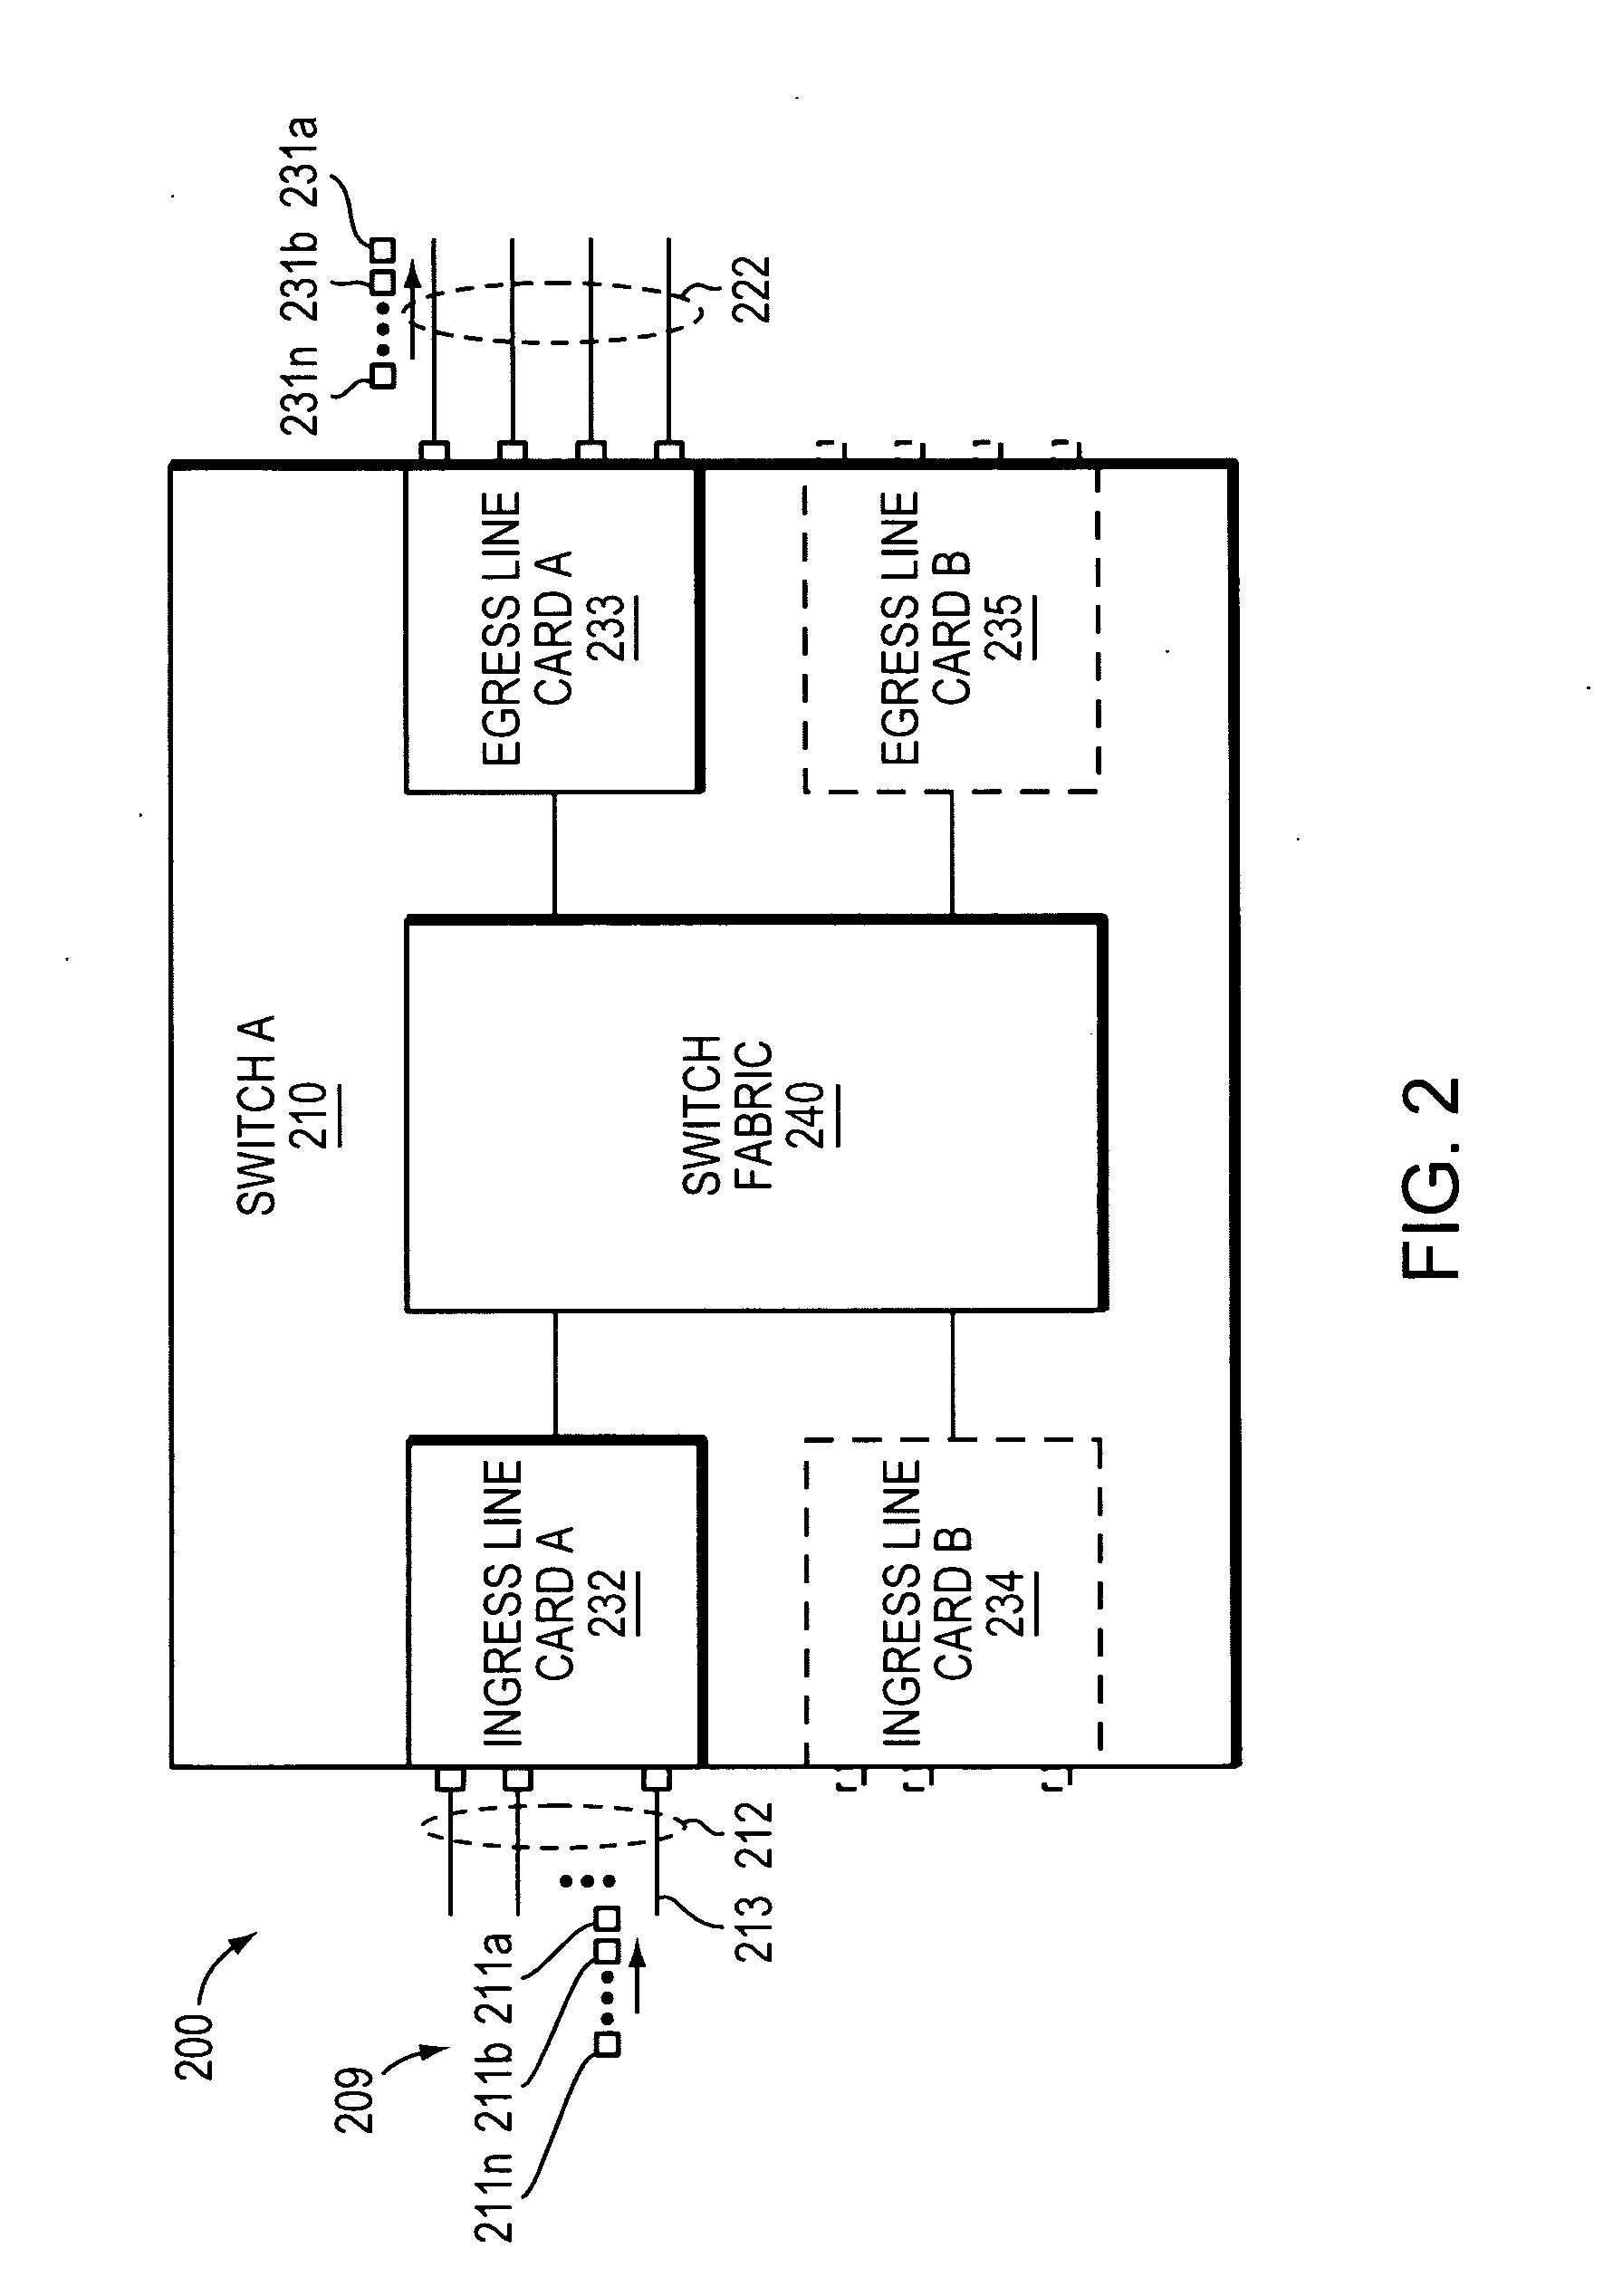 Method and apparatus for performing link aggregation